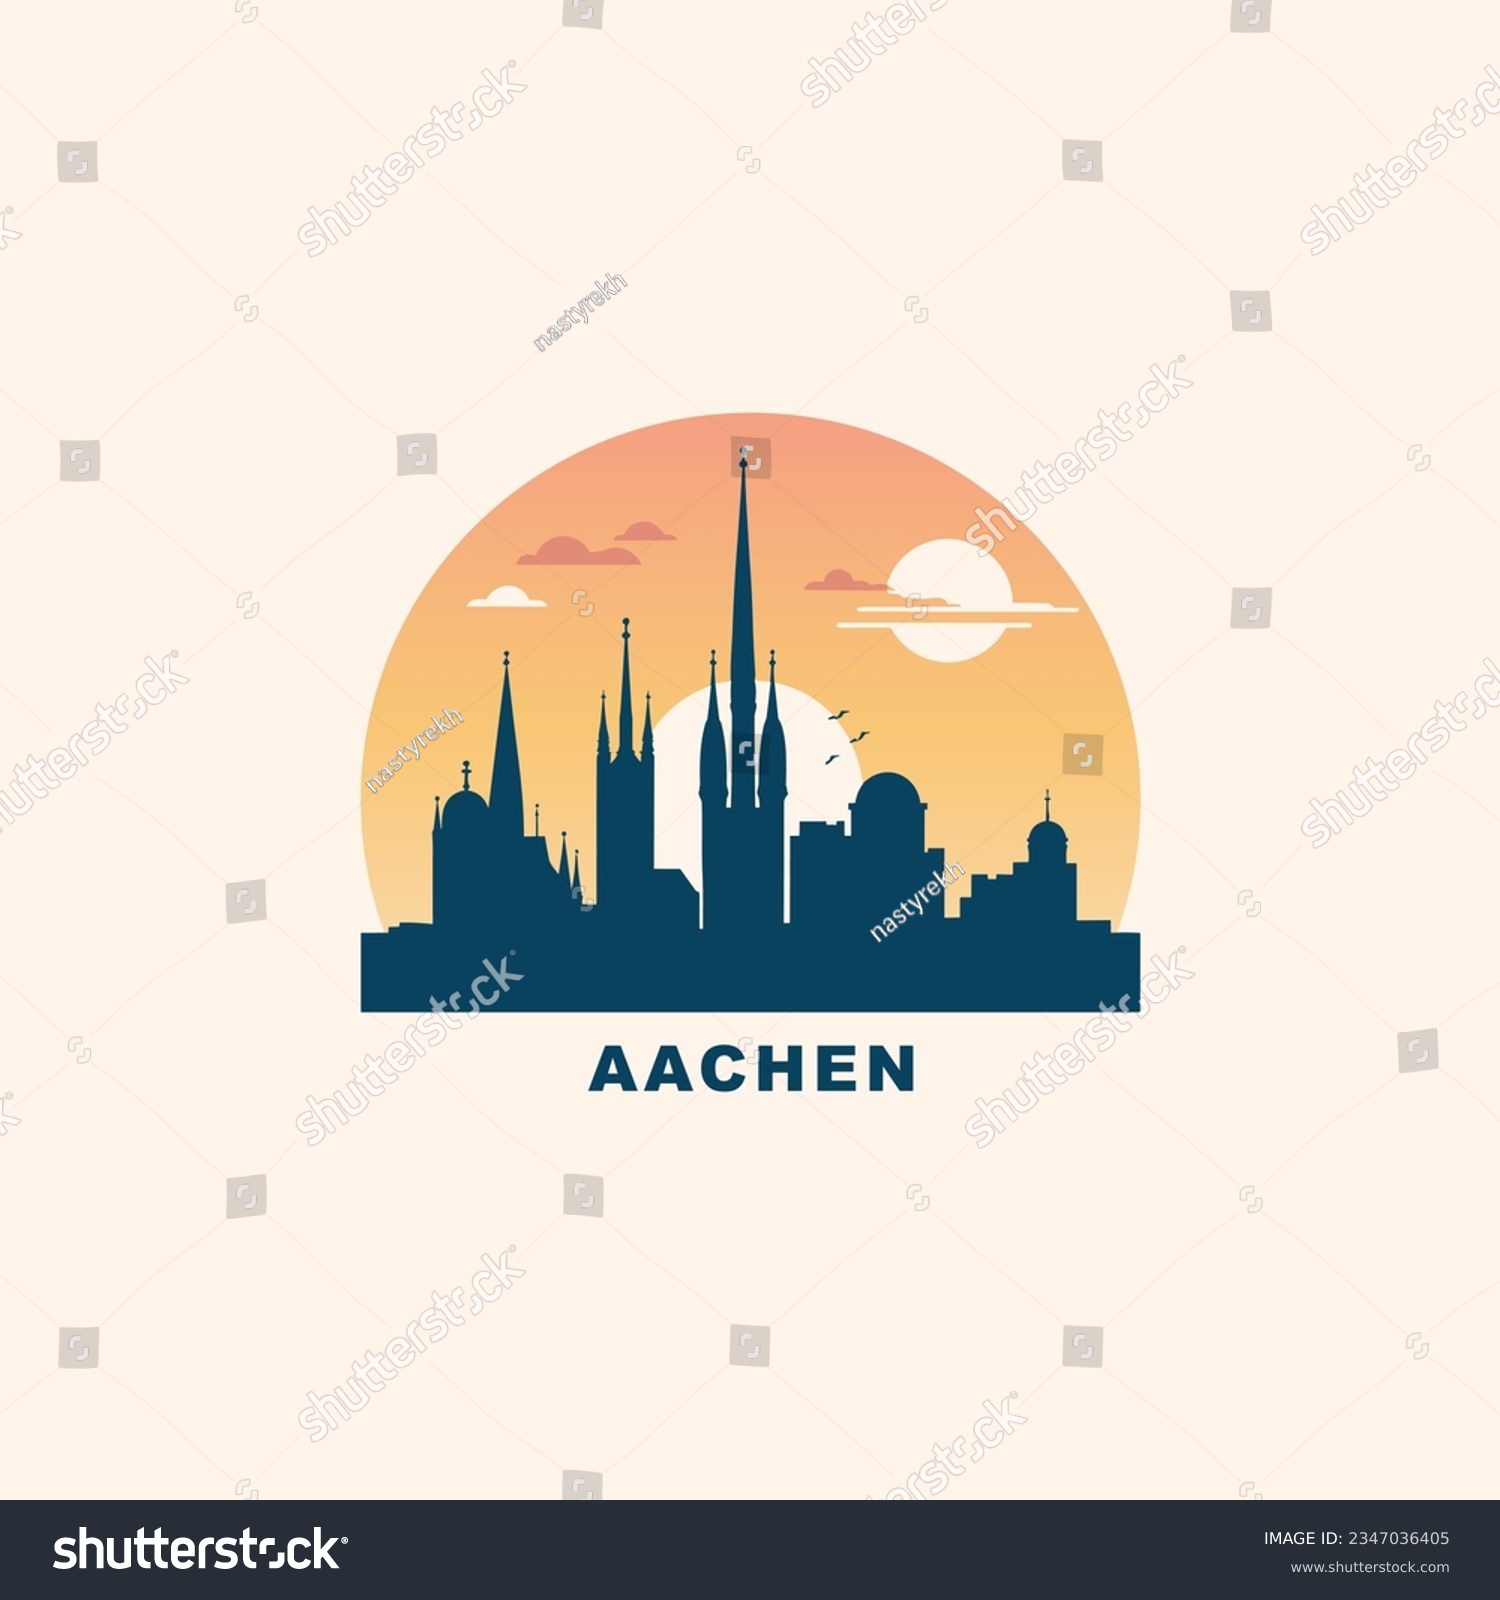 SVG of Germany Aachen cityscape skyline city panorama vector flat modern logo icon. North Rhine-Westphalia emblem idea with landmarks and building silhouettes at sunrise sunset svg